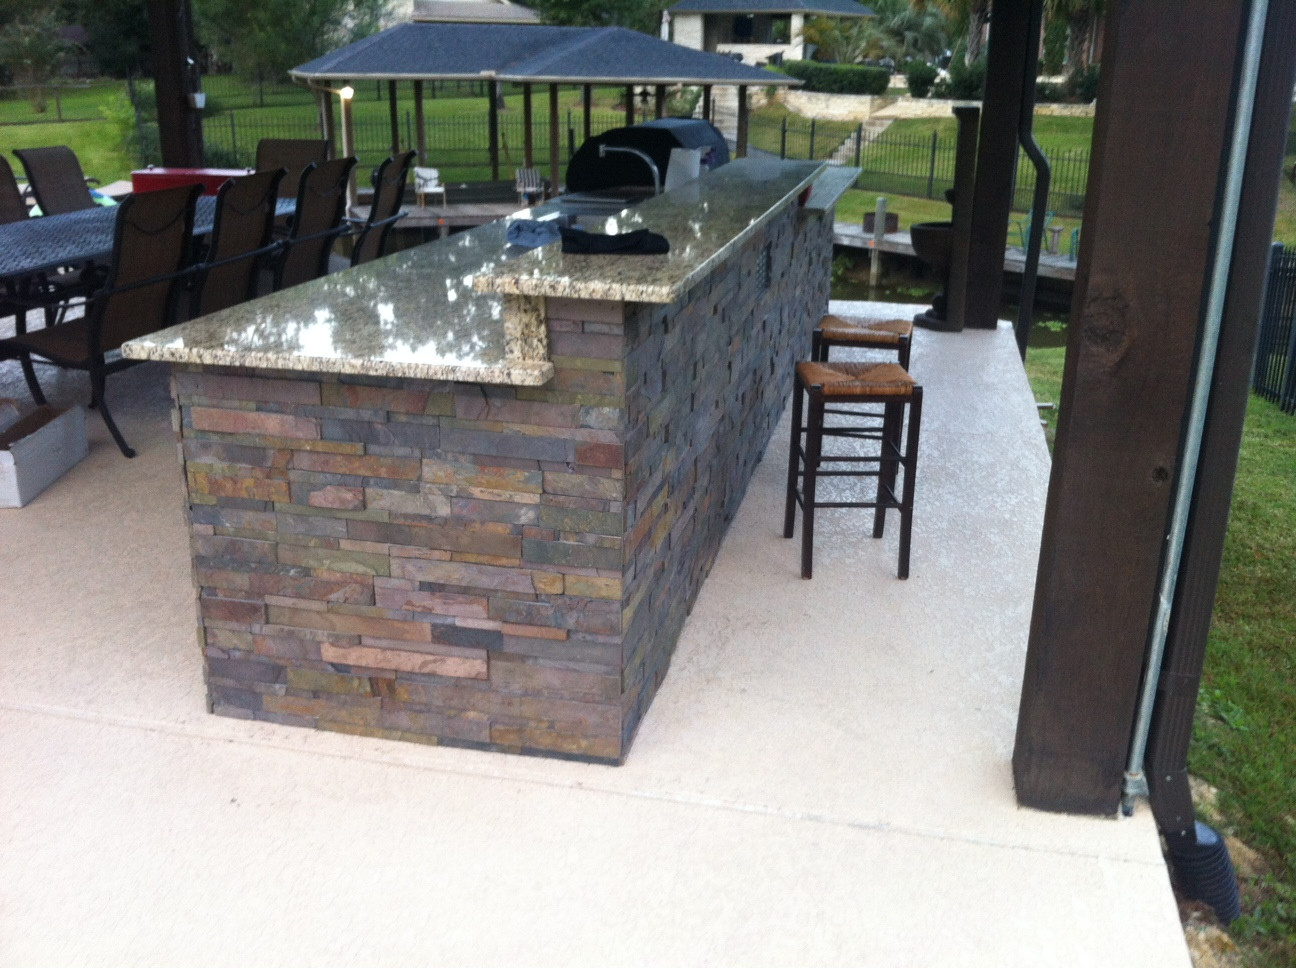 DIY Outdoor Kitchen Kits
 Just about done with my outdoor kitchen DIY granite